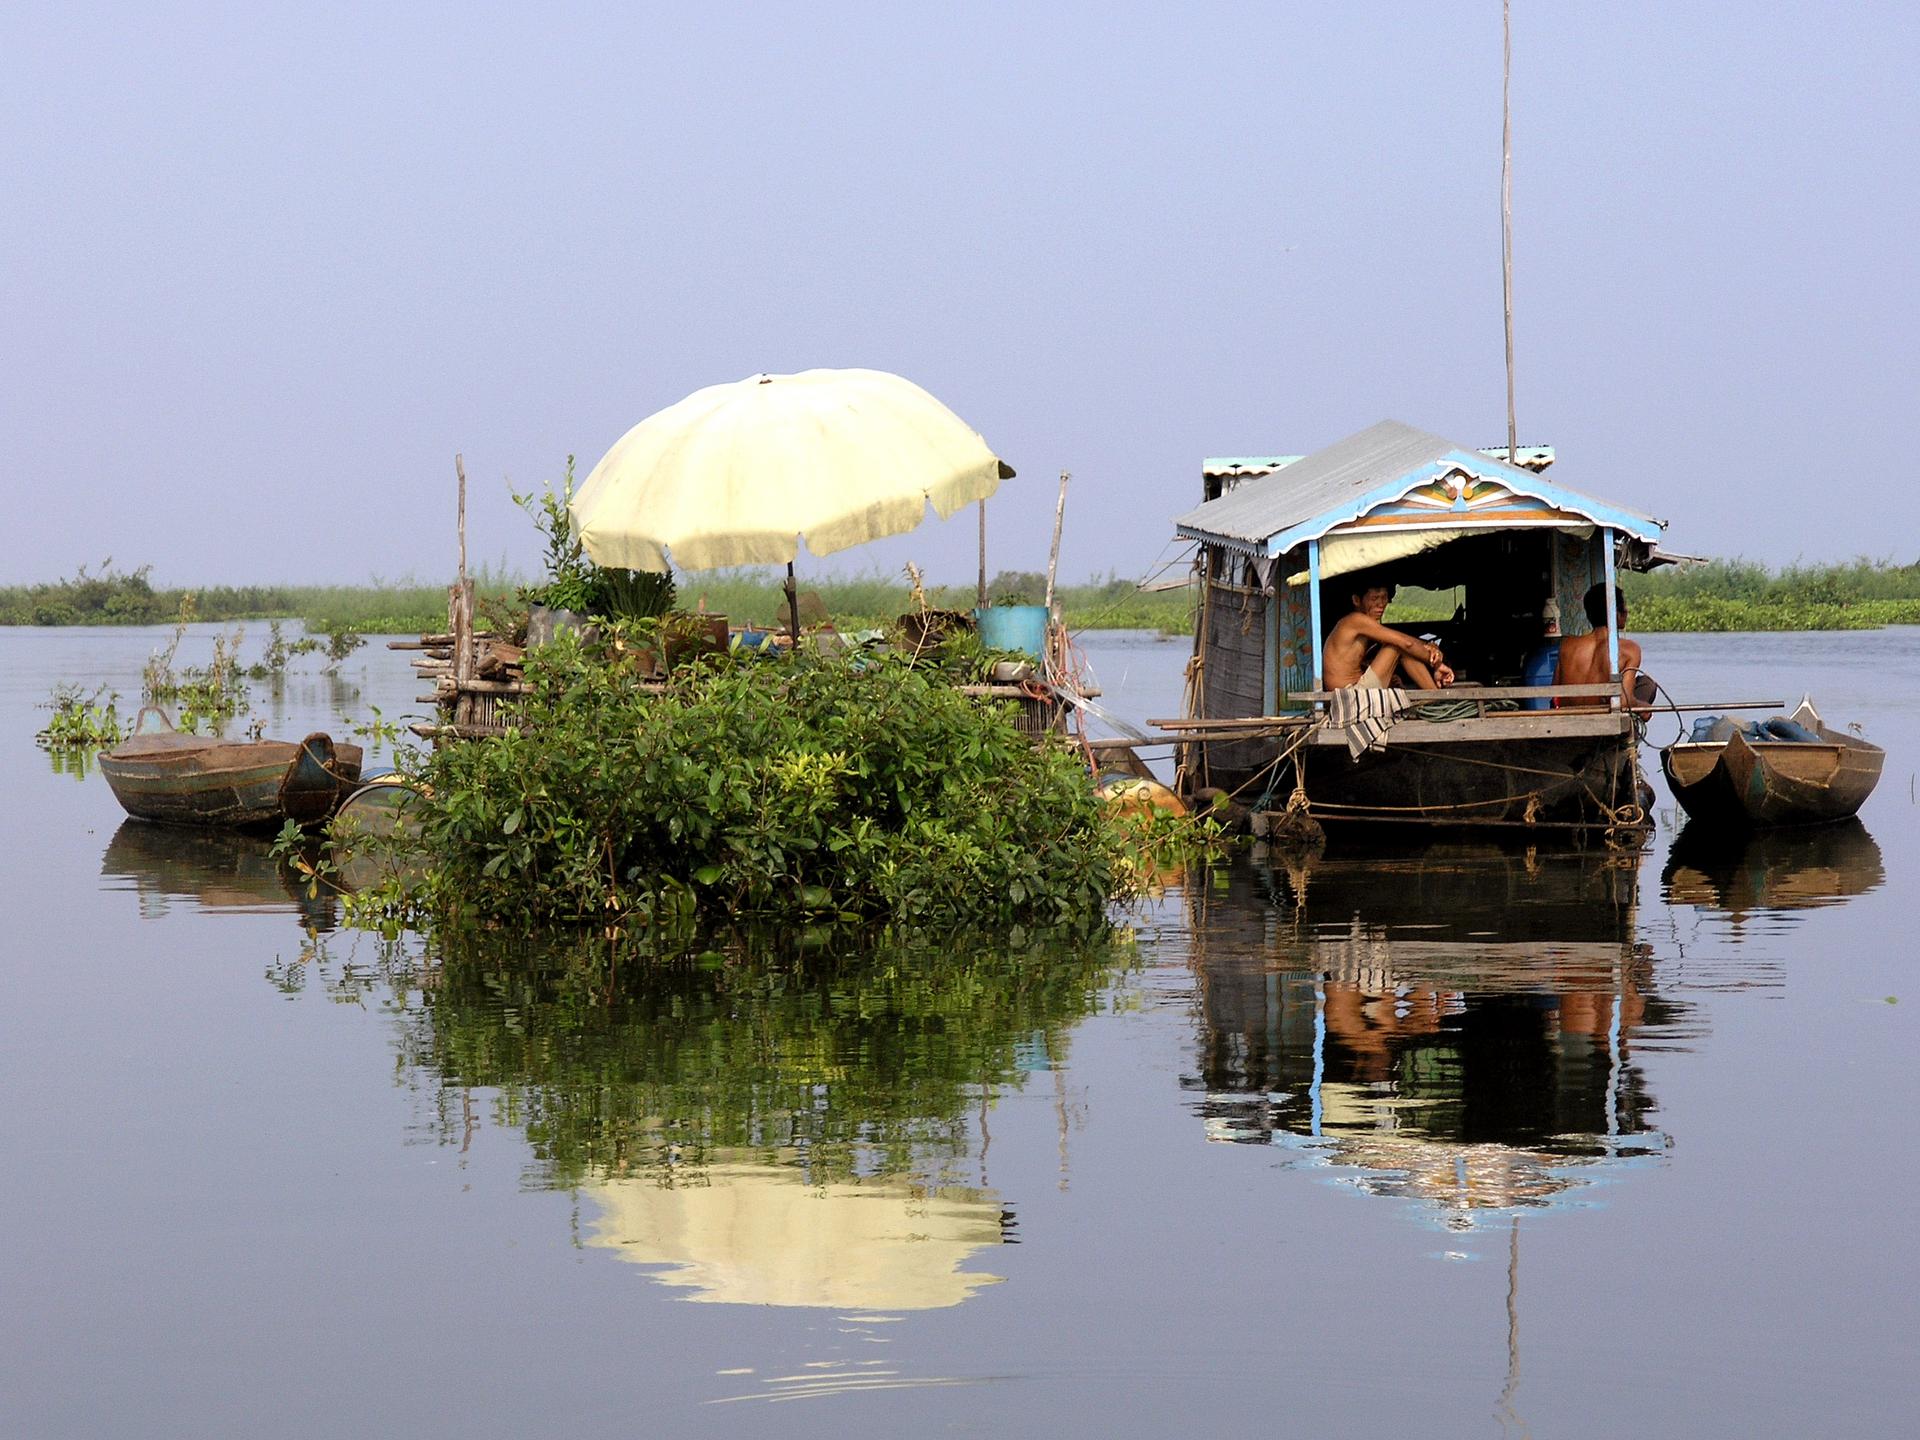 Cambodia's Tonle Sap lake is sounding an alarm over China's dams on the Mekong River, which are blocking the flow of silt and affecting fish catches.